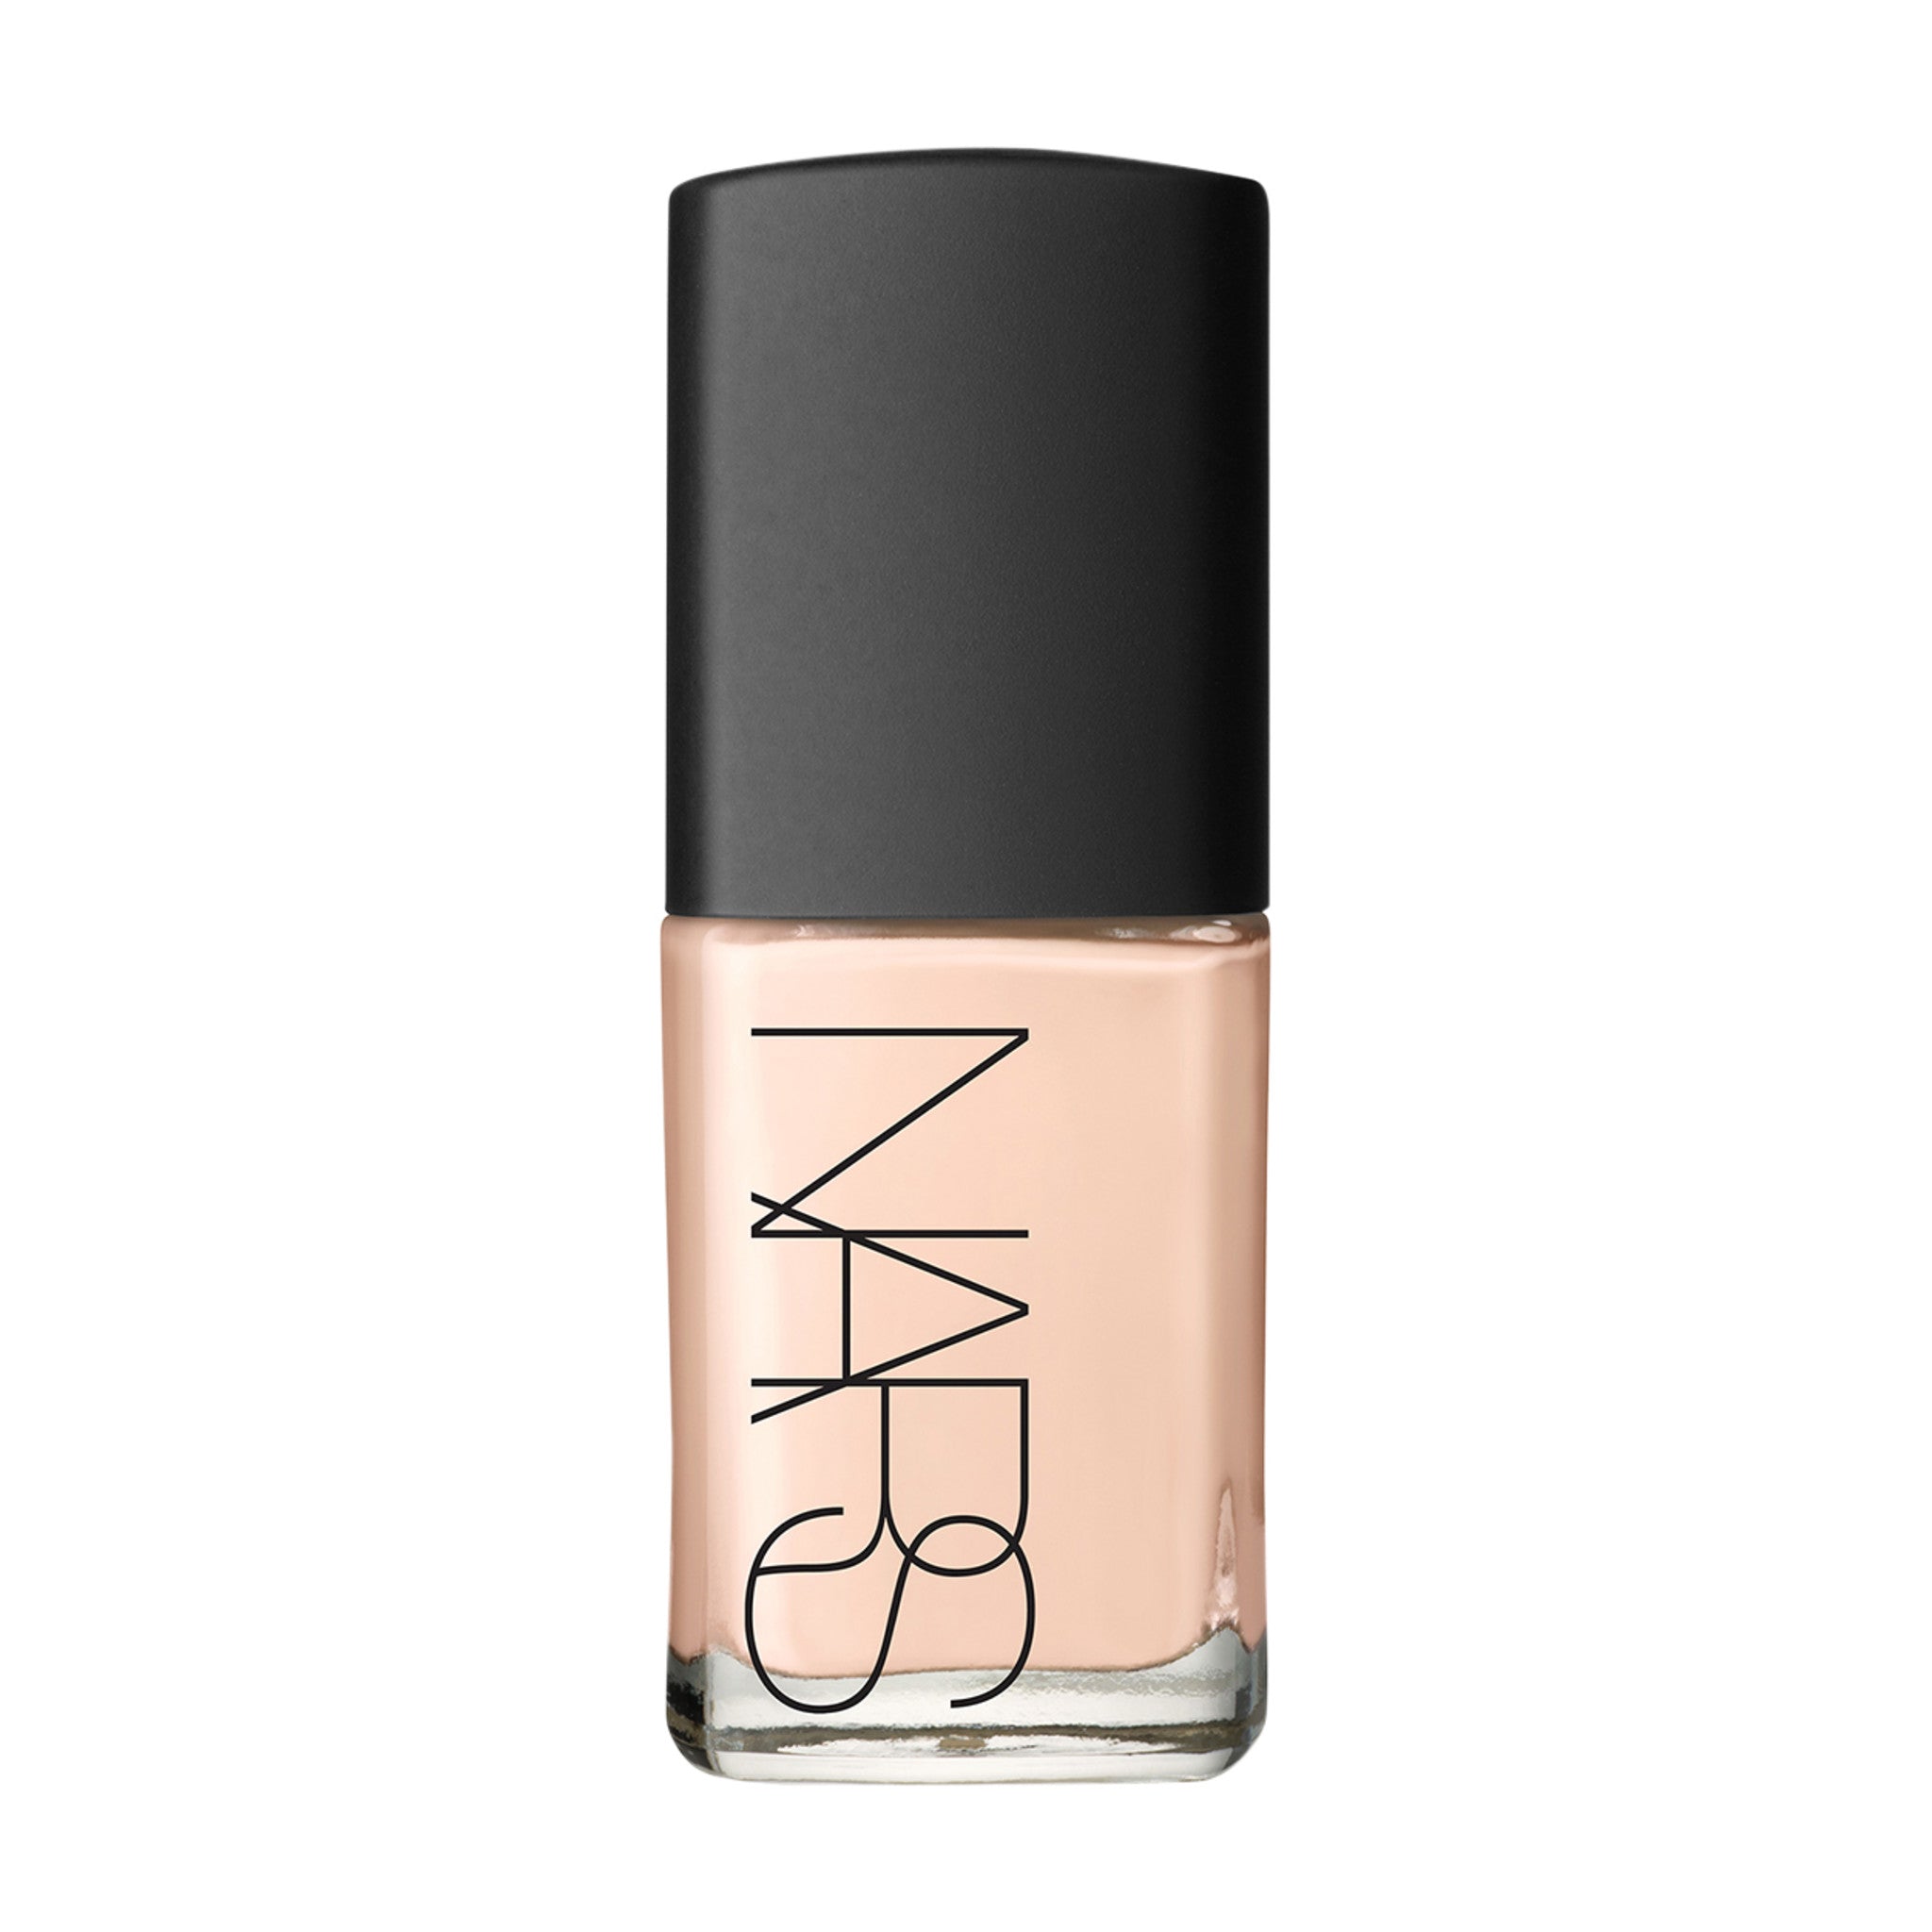 Nars Sheer Glow Foundation Color/Shade variant: Oslo L1 main image. This product is for light cool complexions